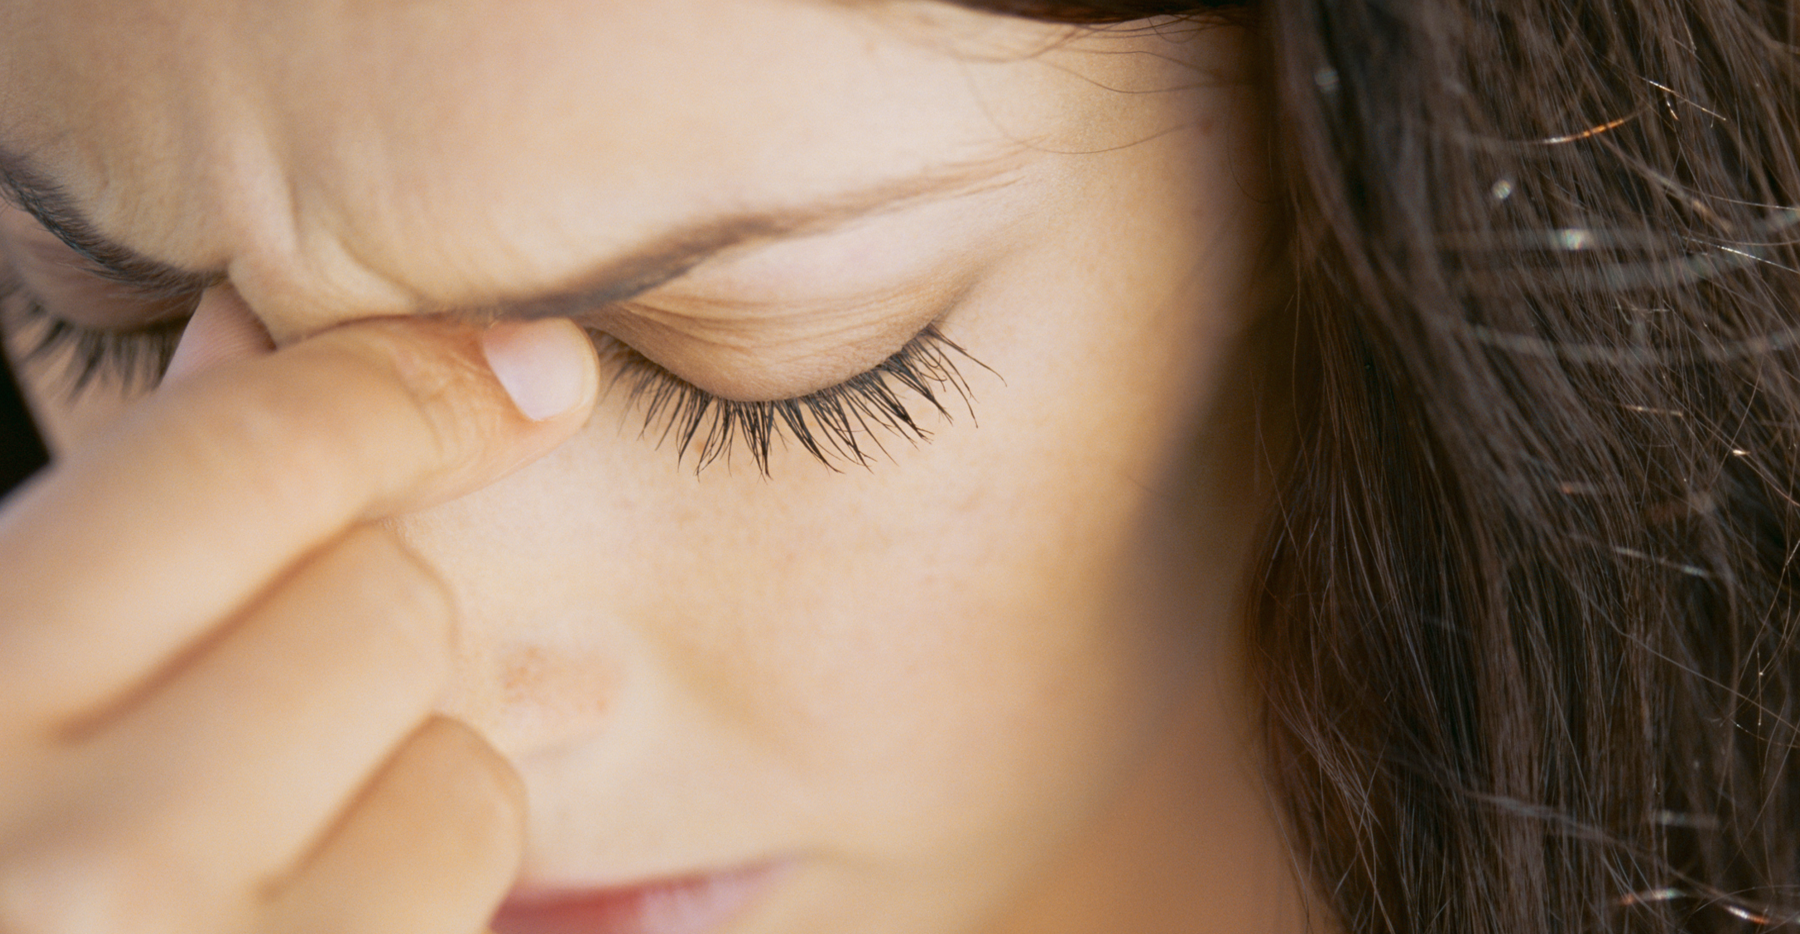 Five Ways to Fight Migraines Without Medication